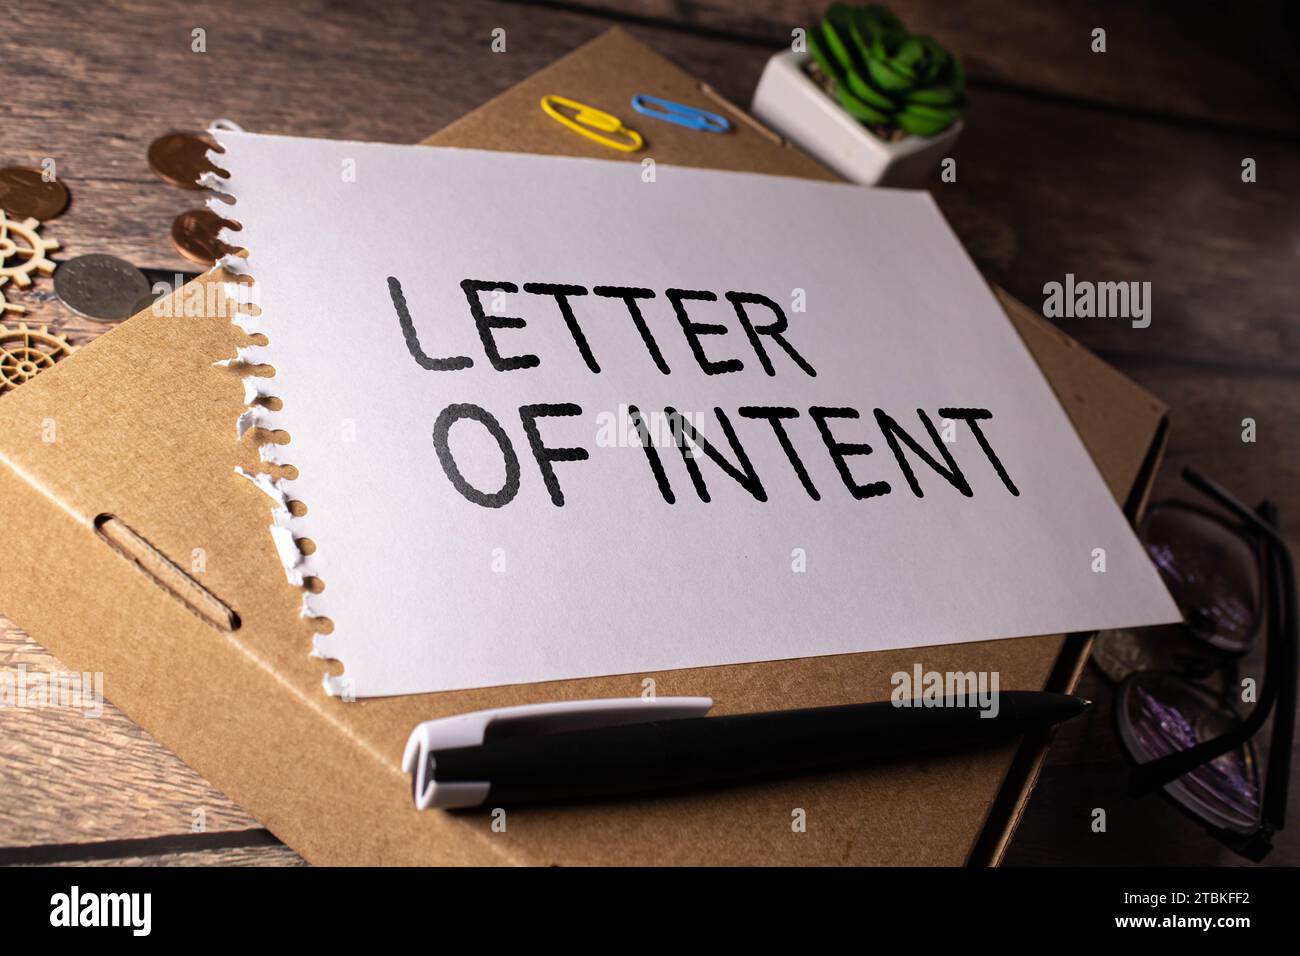 LETTER OF INTENT text on a paper clipboard with magnifier and keyboard on wooden background. Stock Photo